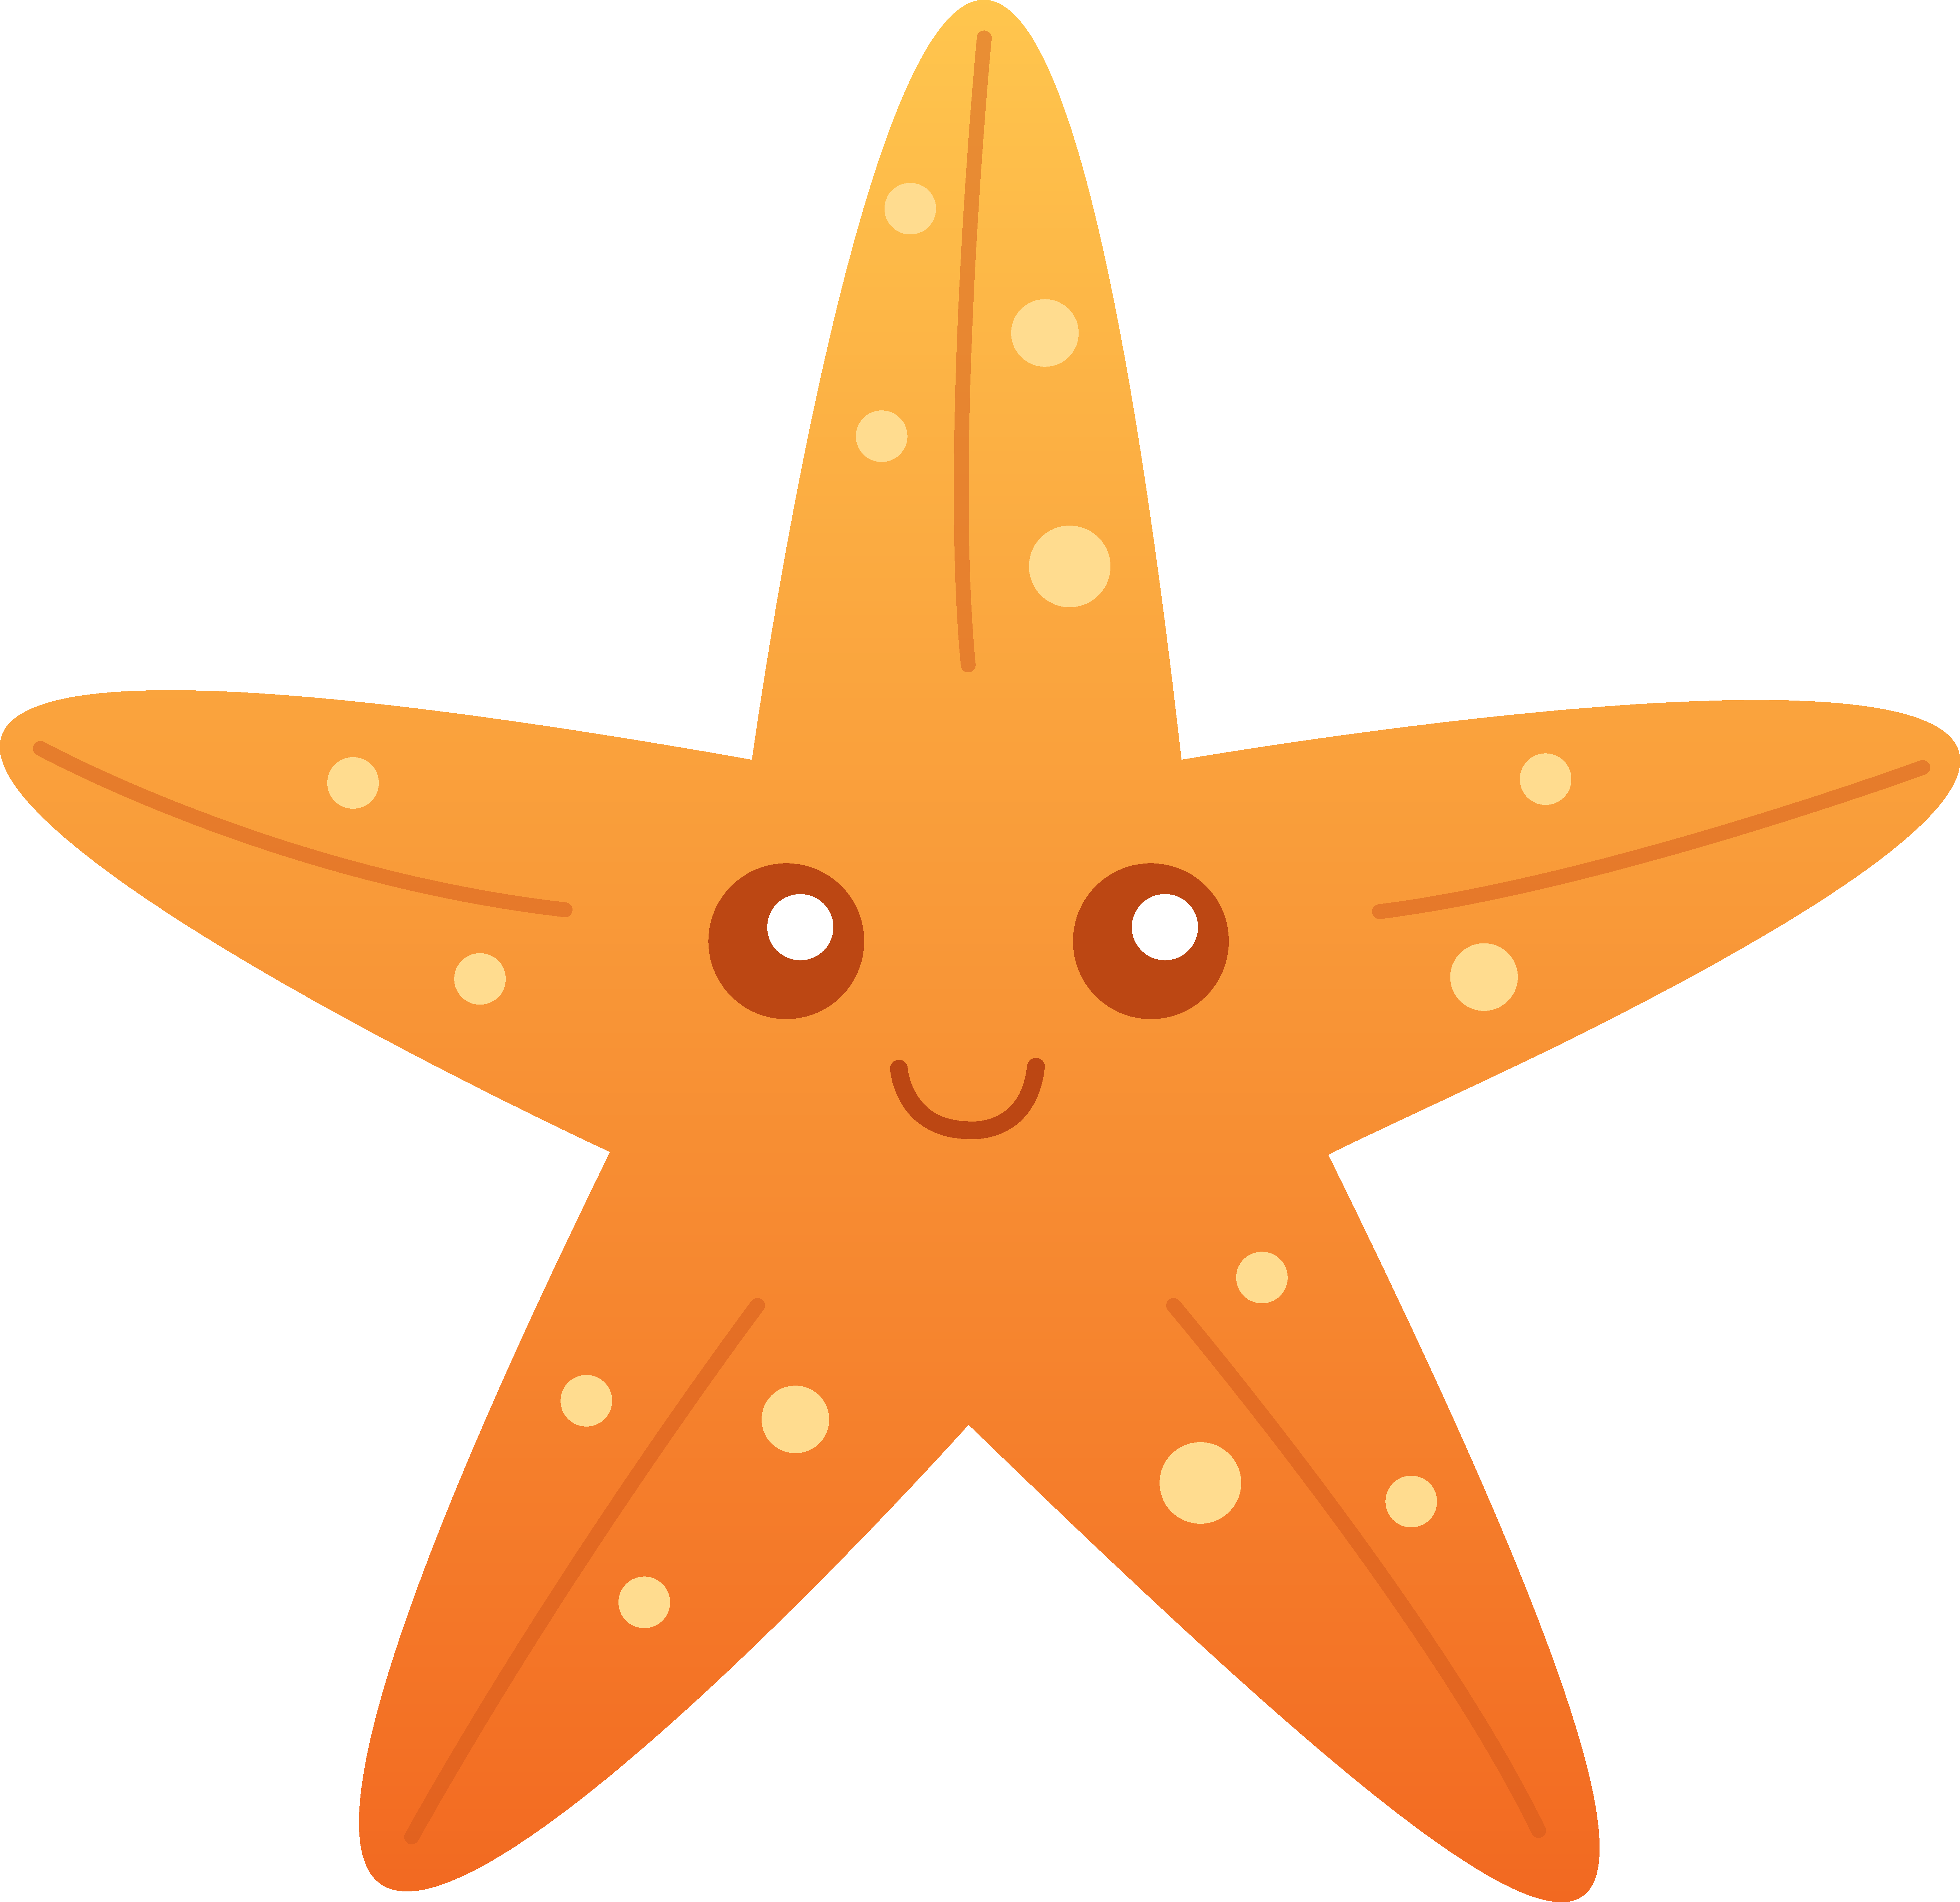 Cute Star Images - Cliparts and Others Art Inspiration